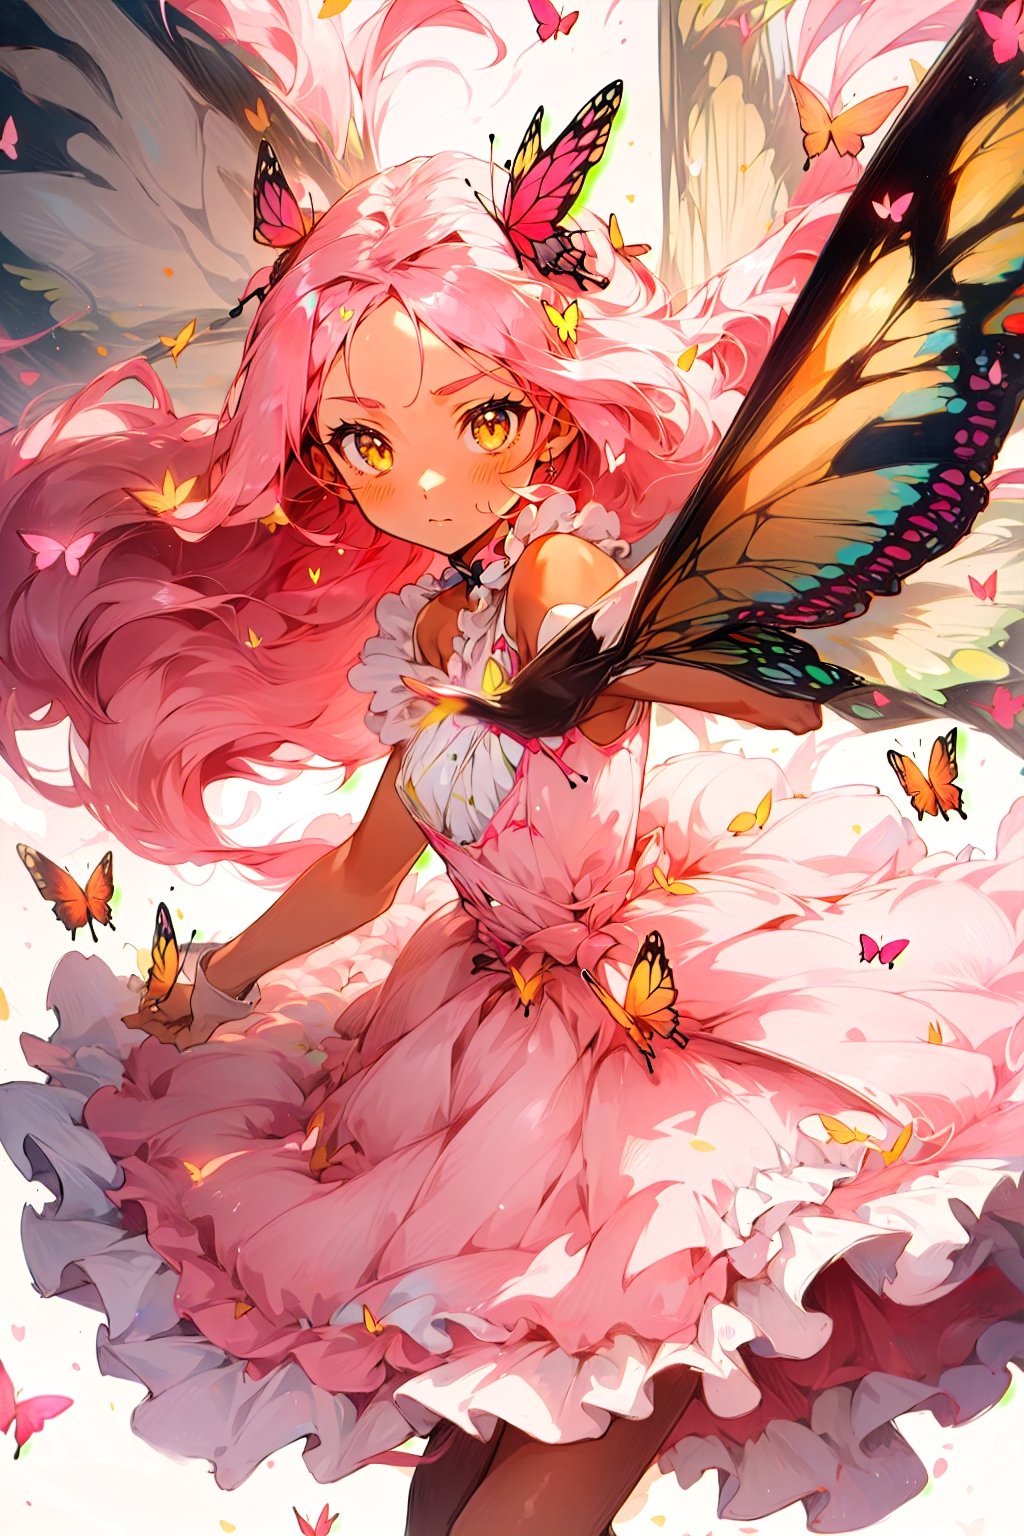 A cute girl with anime-style butterflies around, long pink hair, tan skin, yellow eyes, a pretty pink dress with yellow frills.